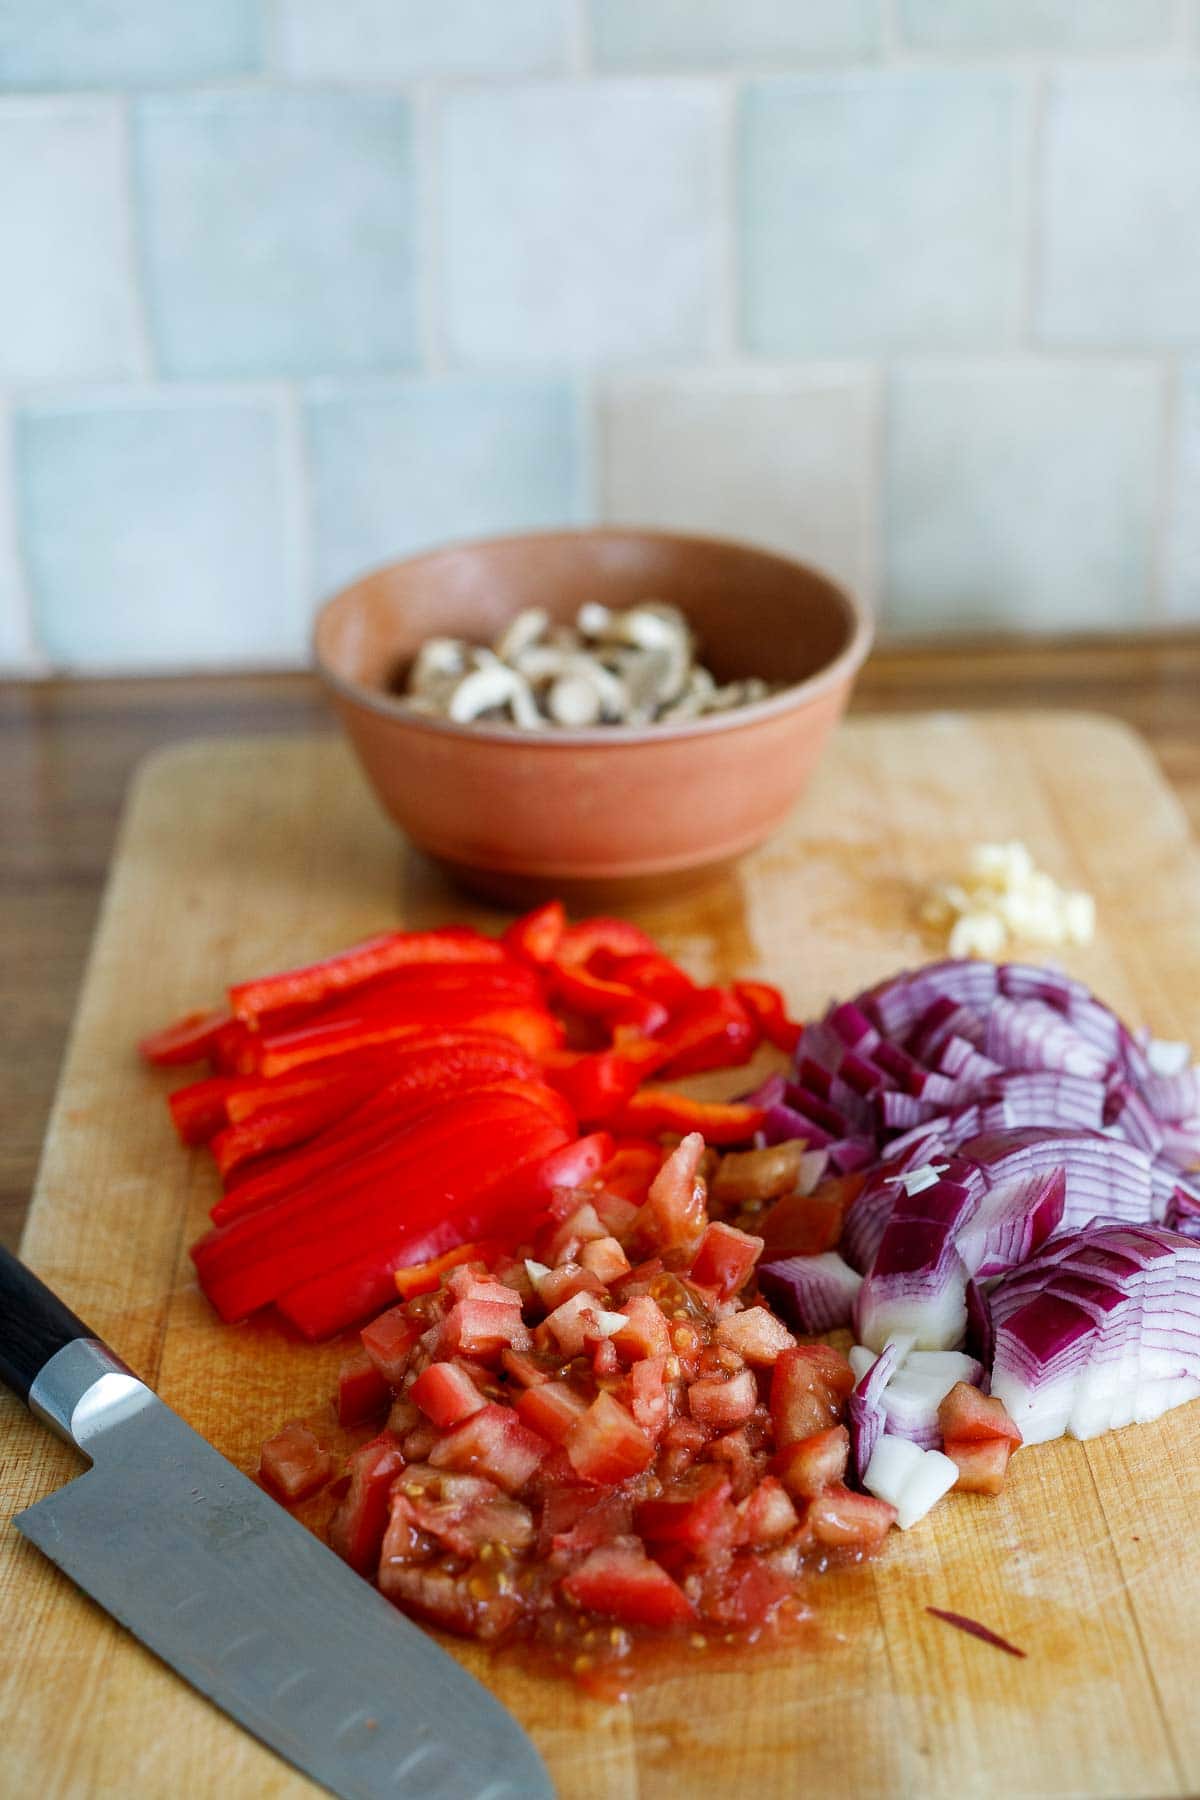 sliced red bell pepper, diced red onion, diced tomato and sliced mushrooms on wood cutting board with sharp knife.